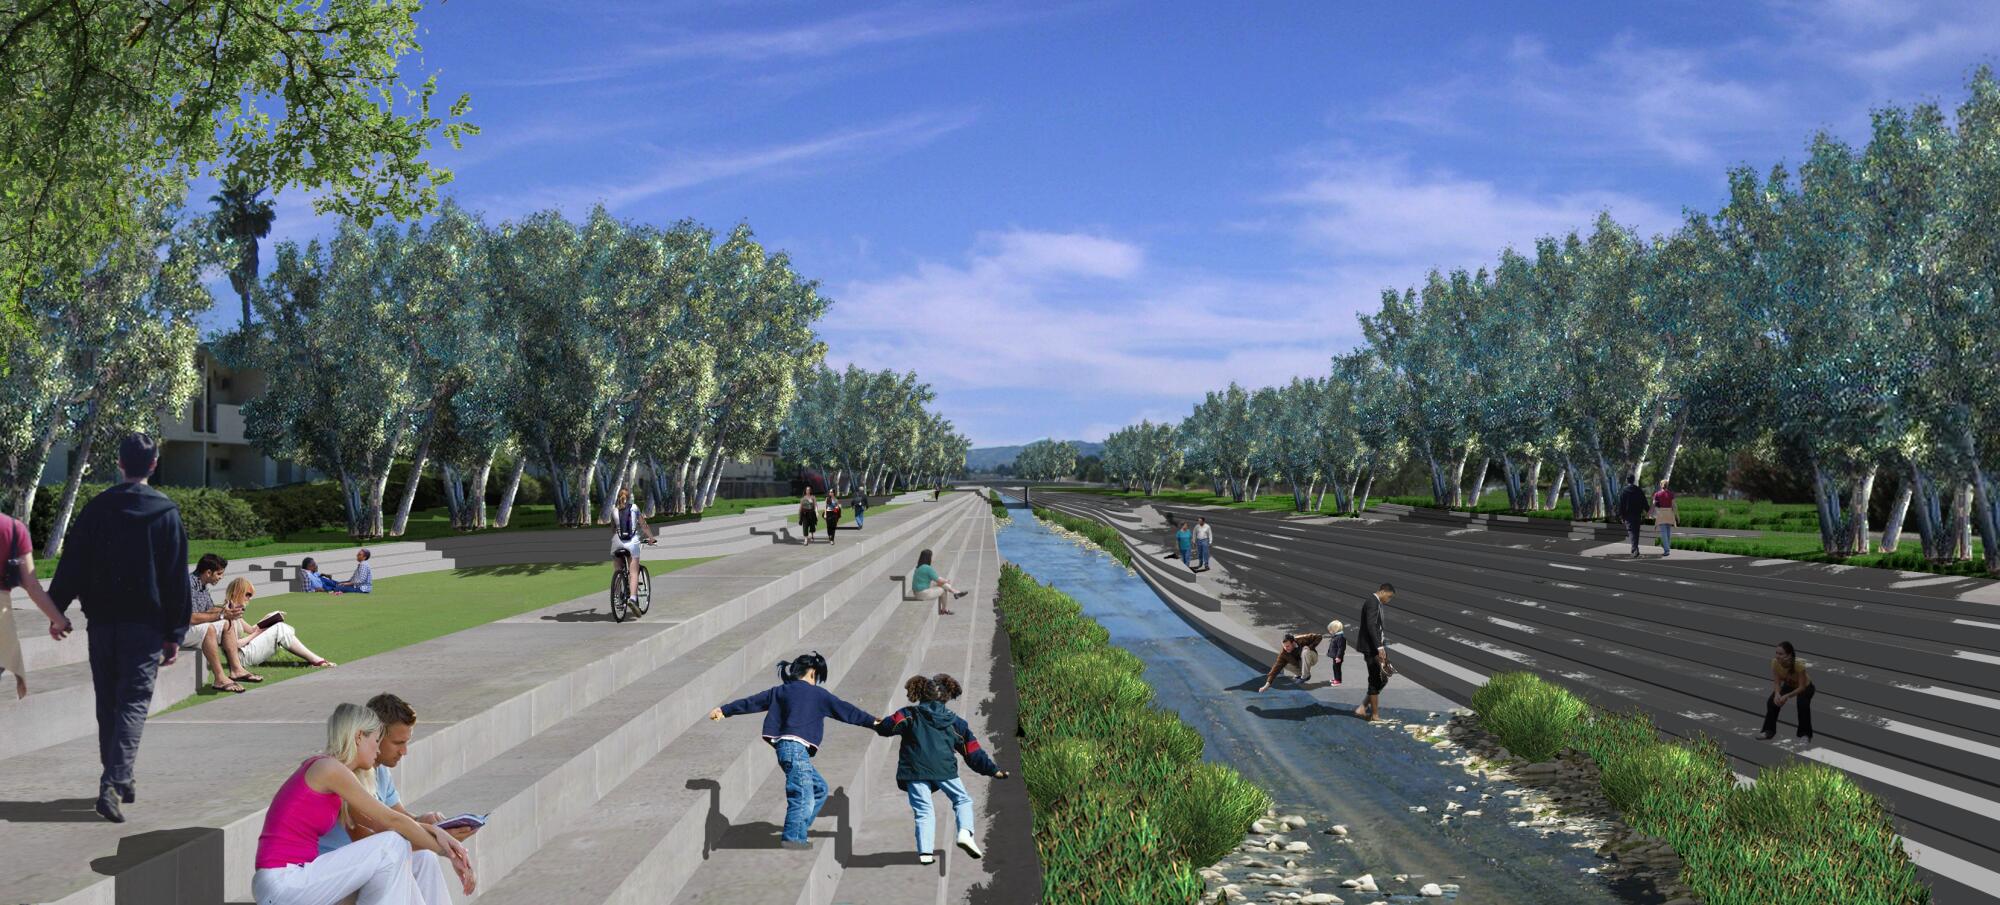 A rendering shows the LA River's embankment's layered into tree lined steps that descend towards the water